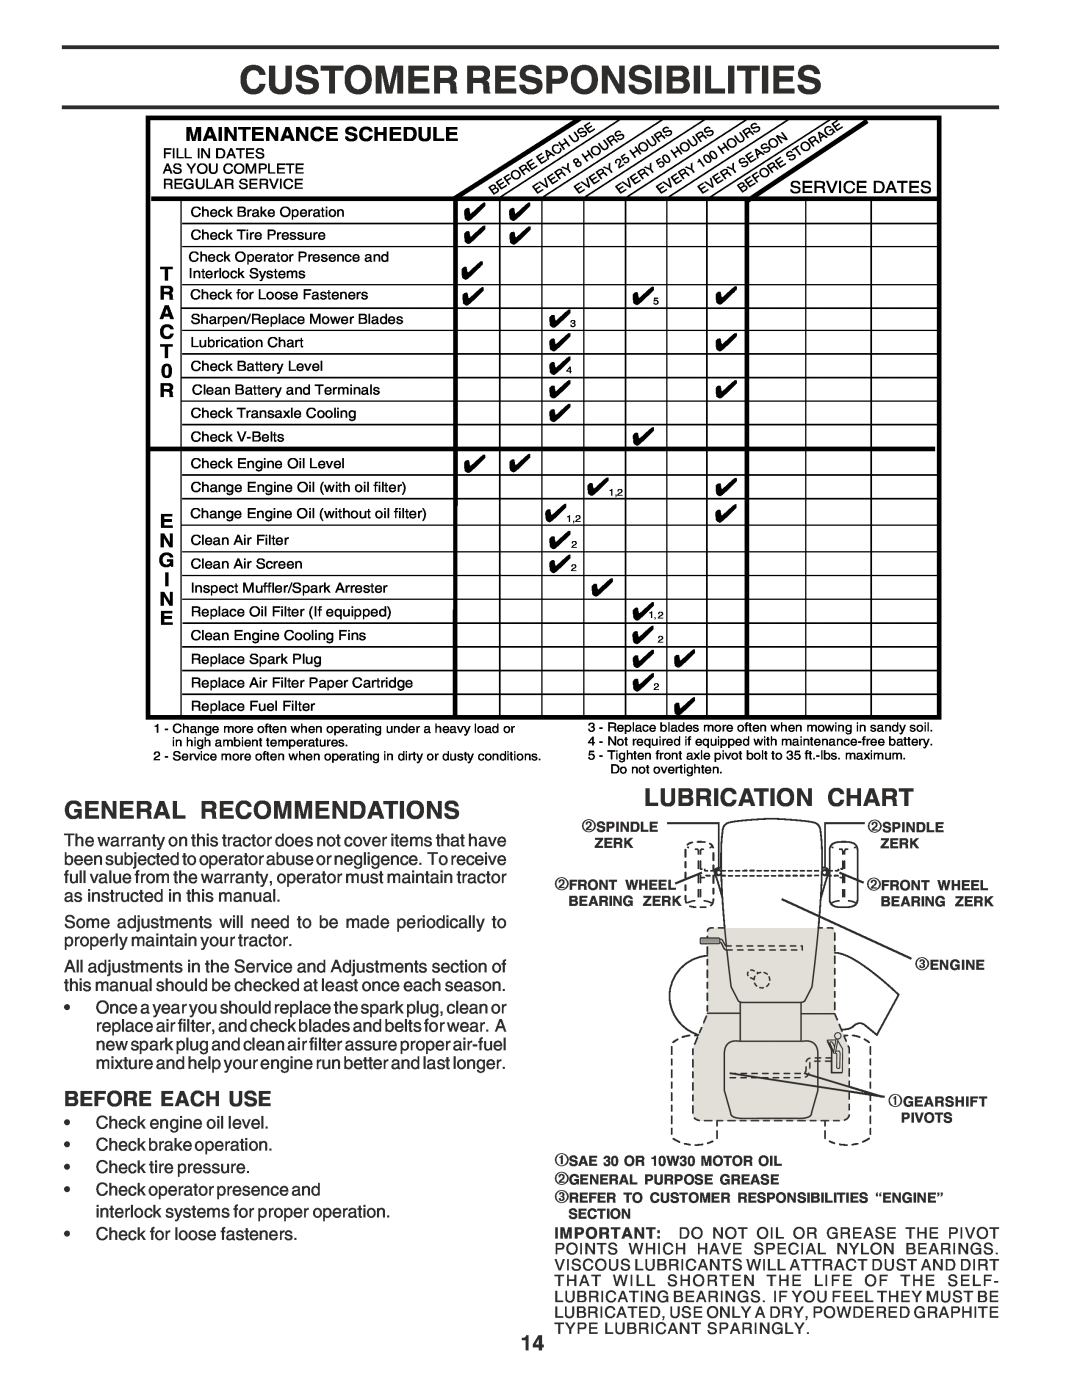 Poulan 180196 owner manual Customer Responsibilities, General Recommendations, Lubrication Chart, Before Each Use 